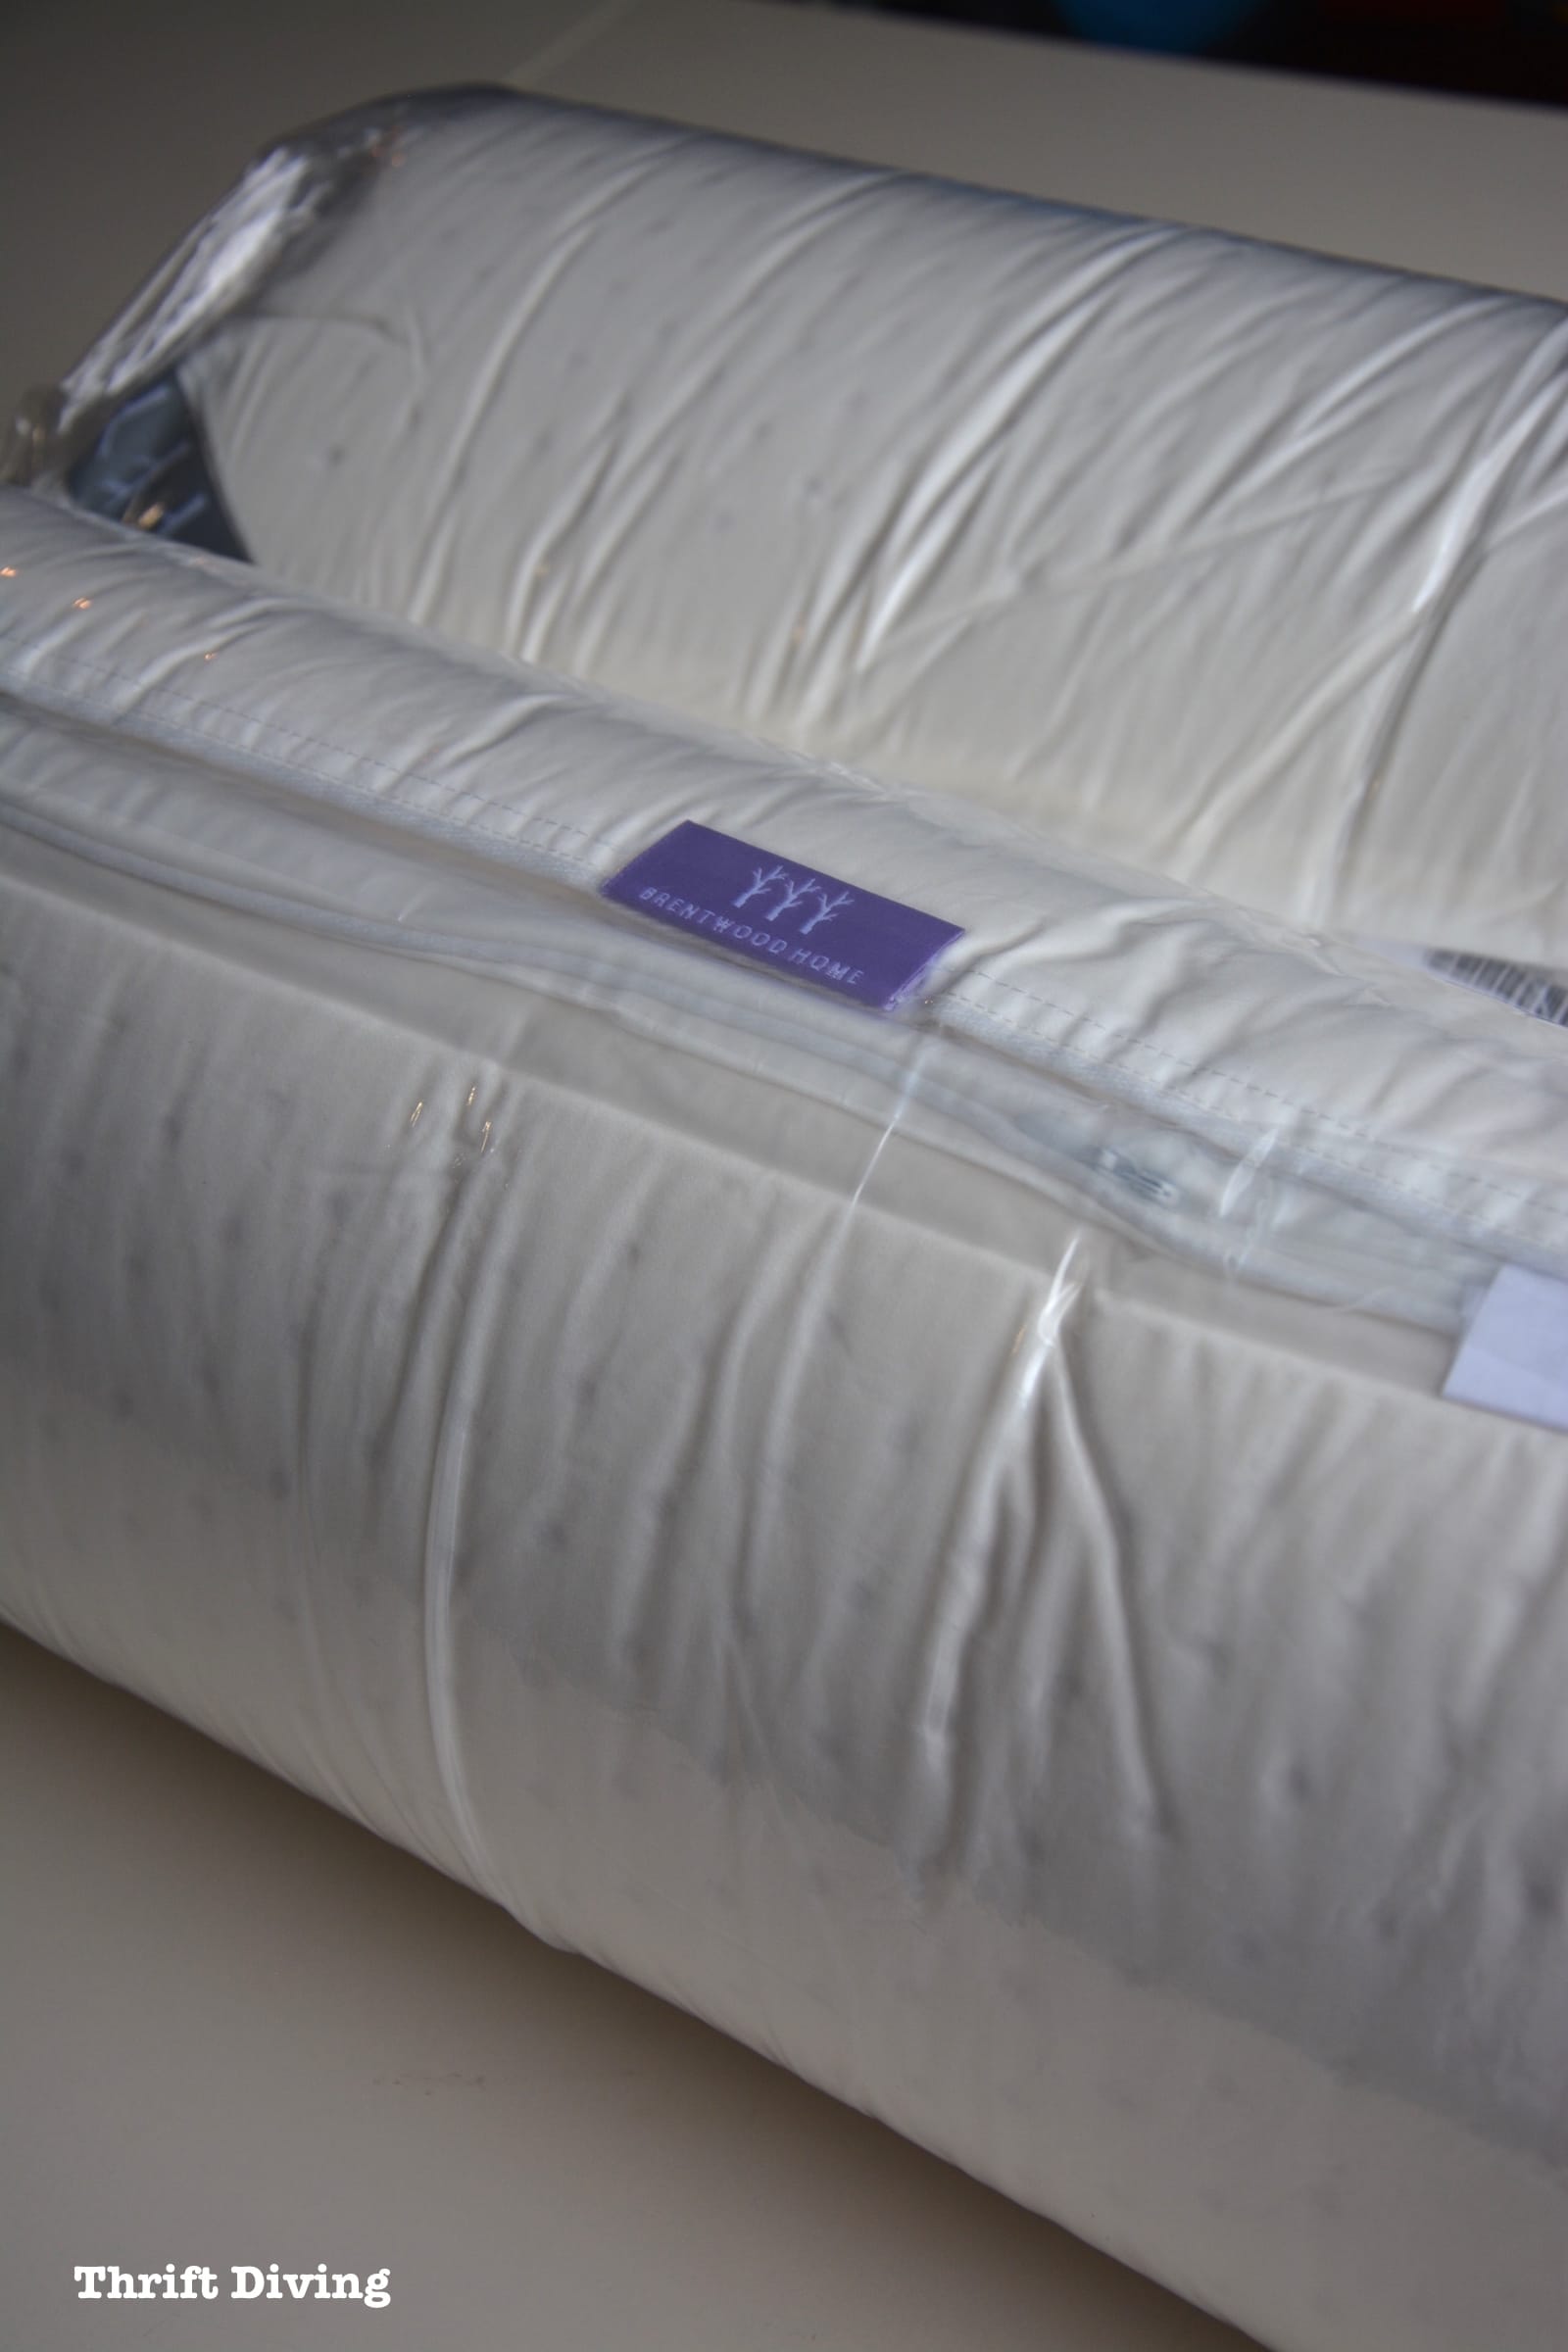 Are Brentwood pillows worth it? A Brentwood Home pillows review - Carmel pillow. - Thrift Diving